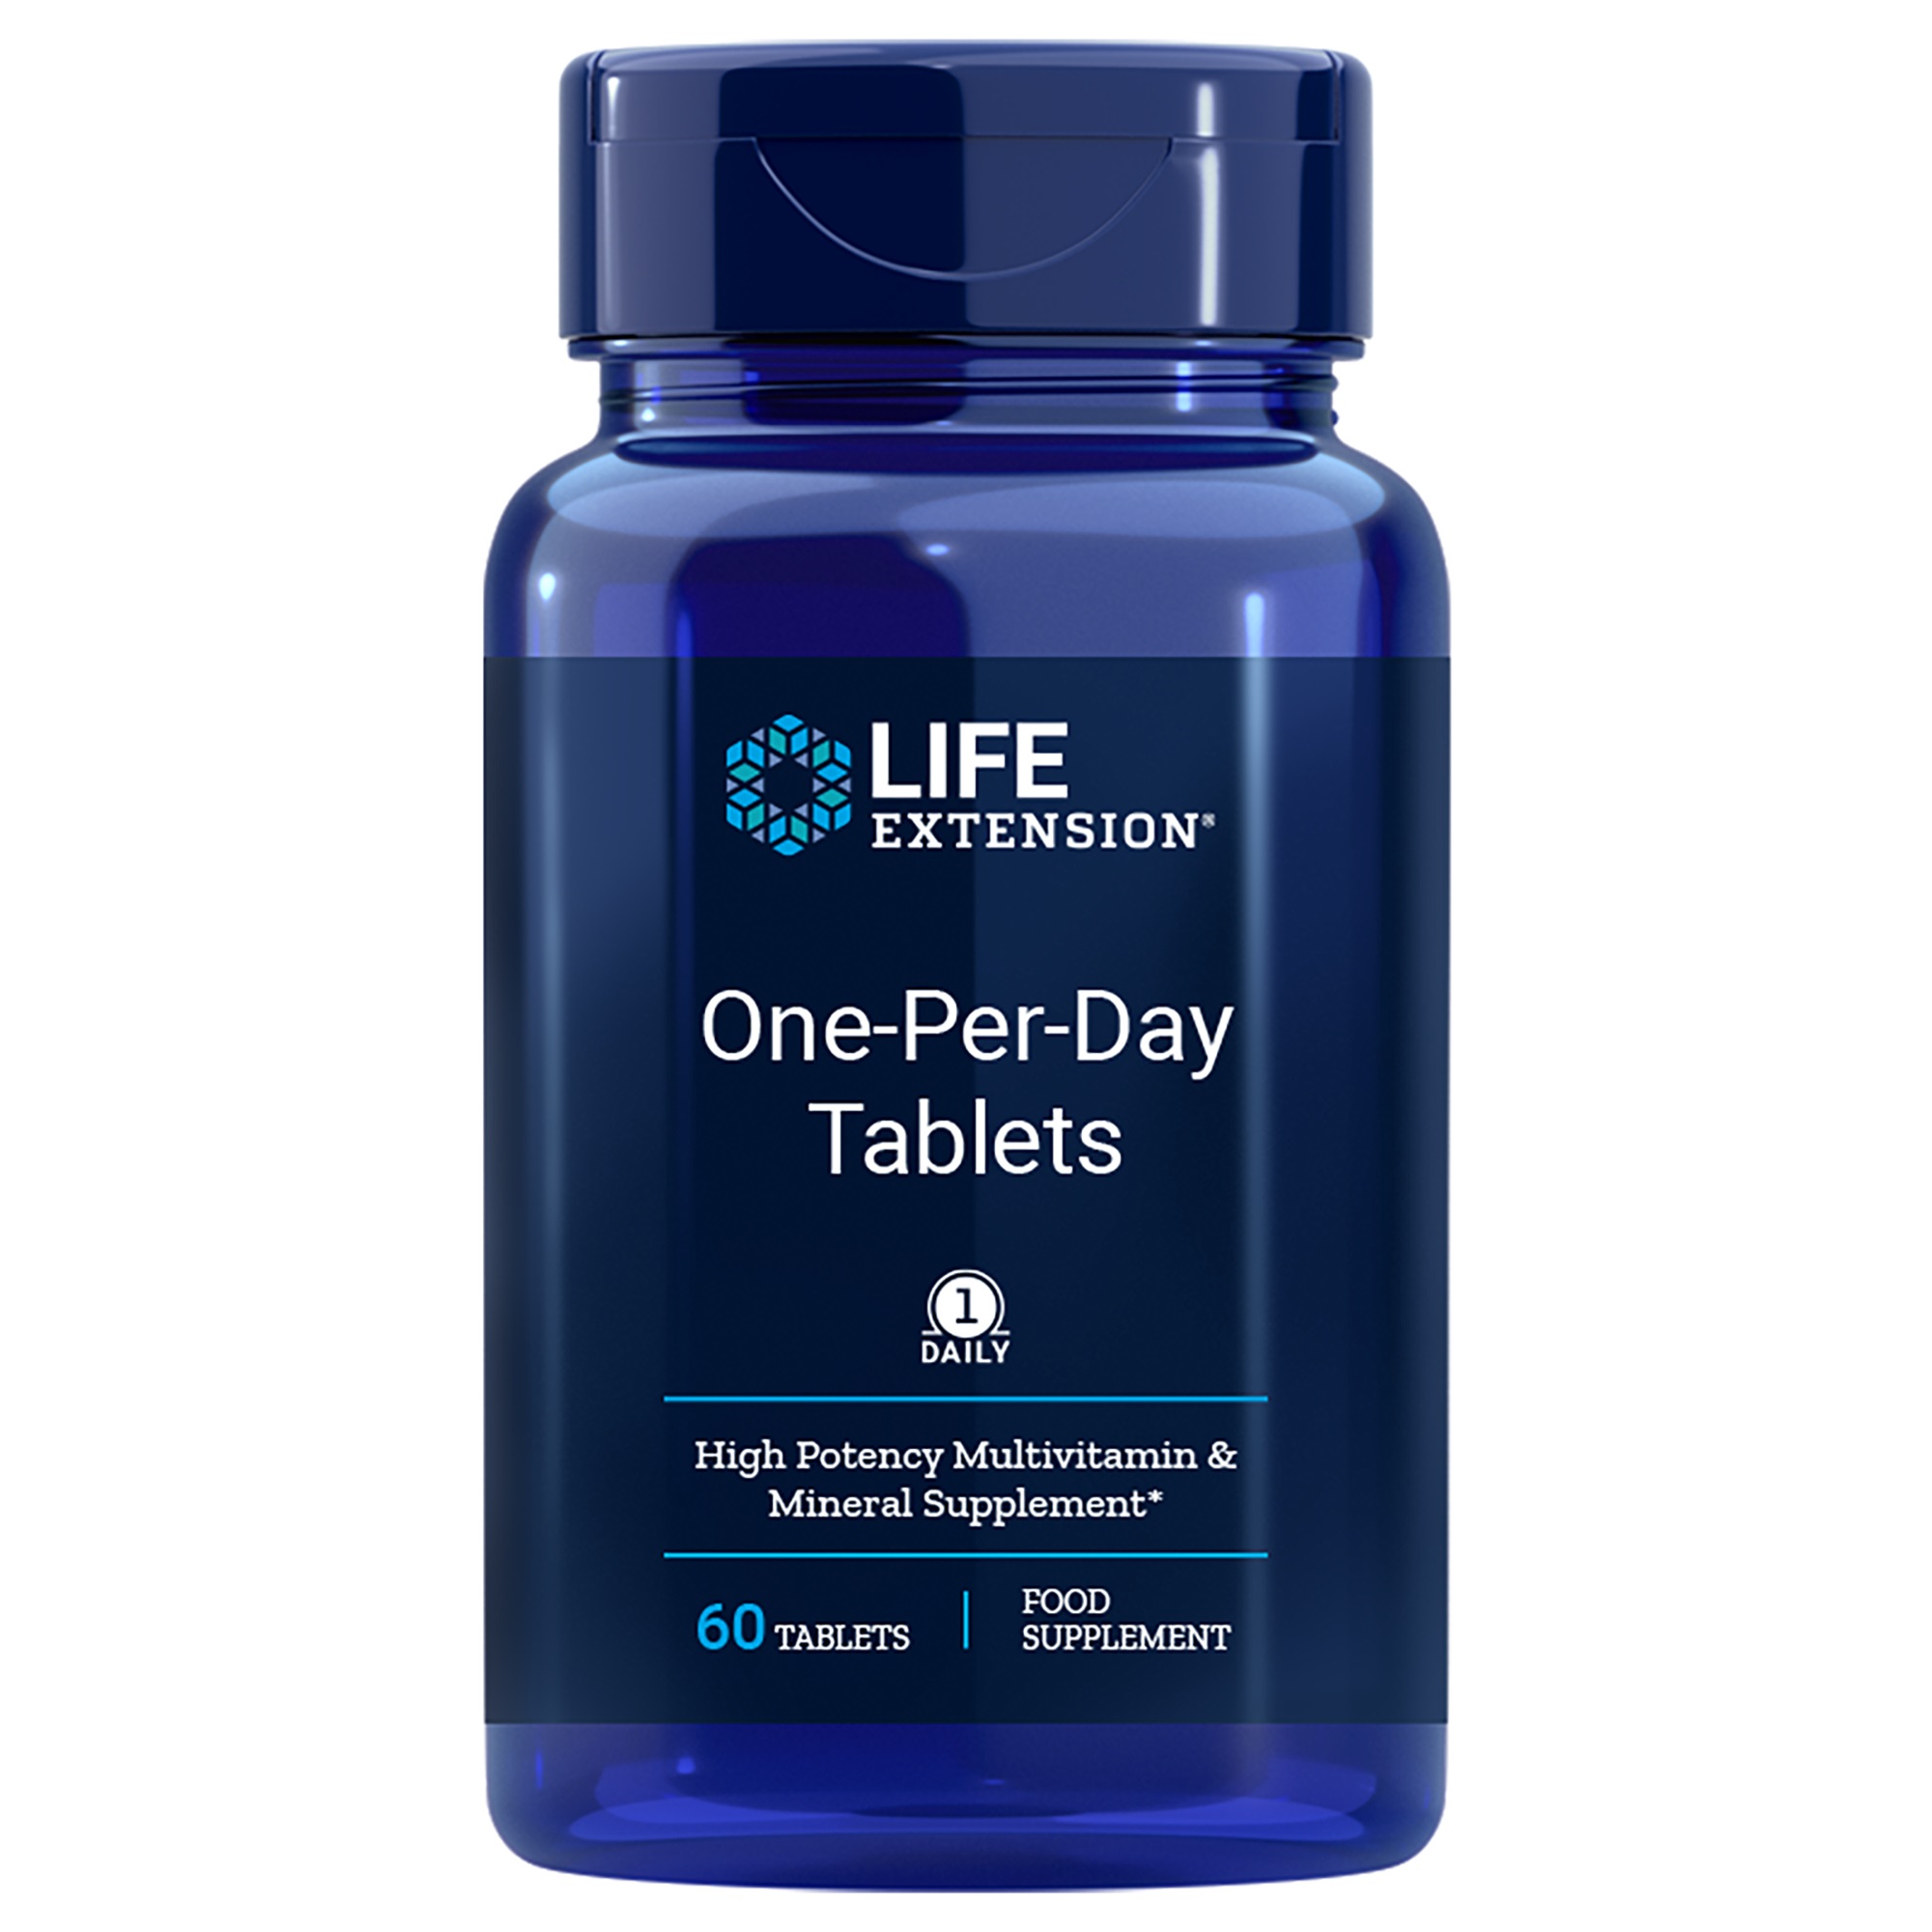 LifeExtension One-Per-Day Tablets